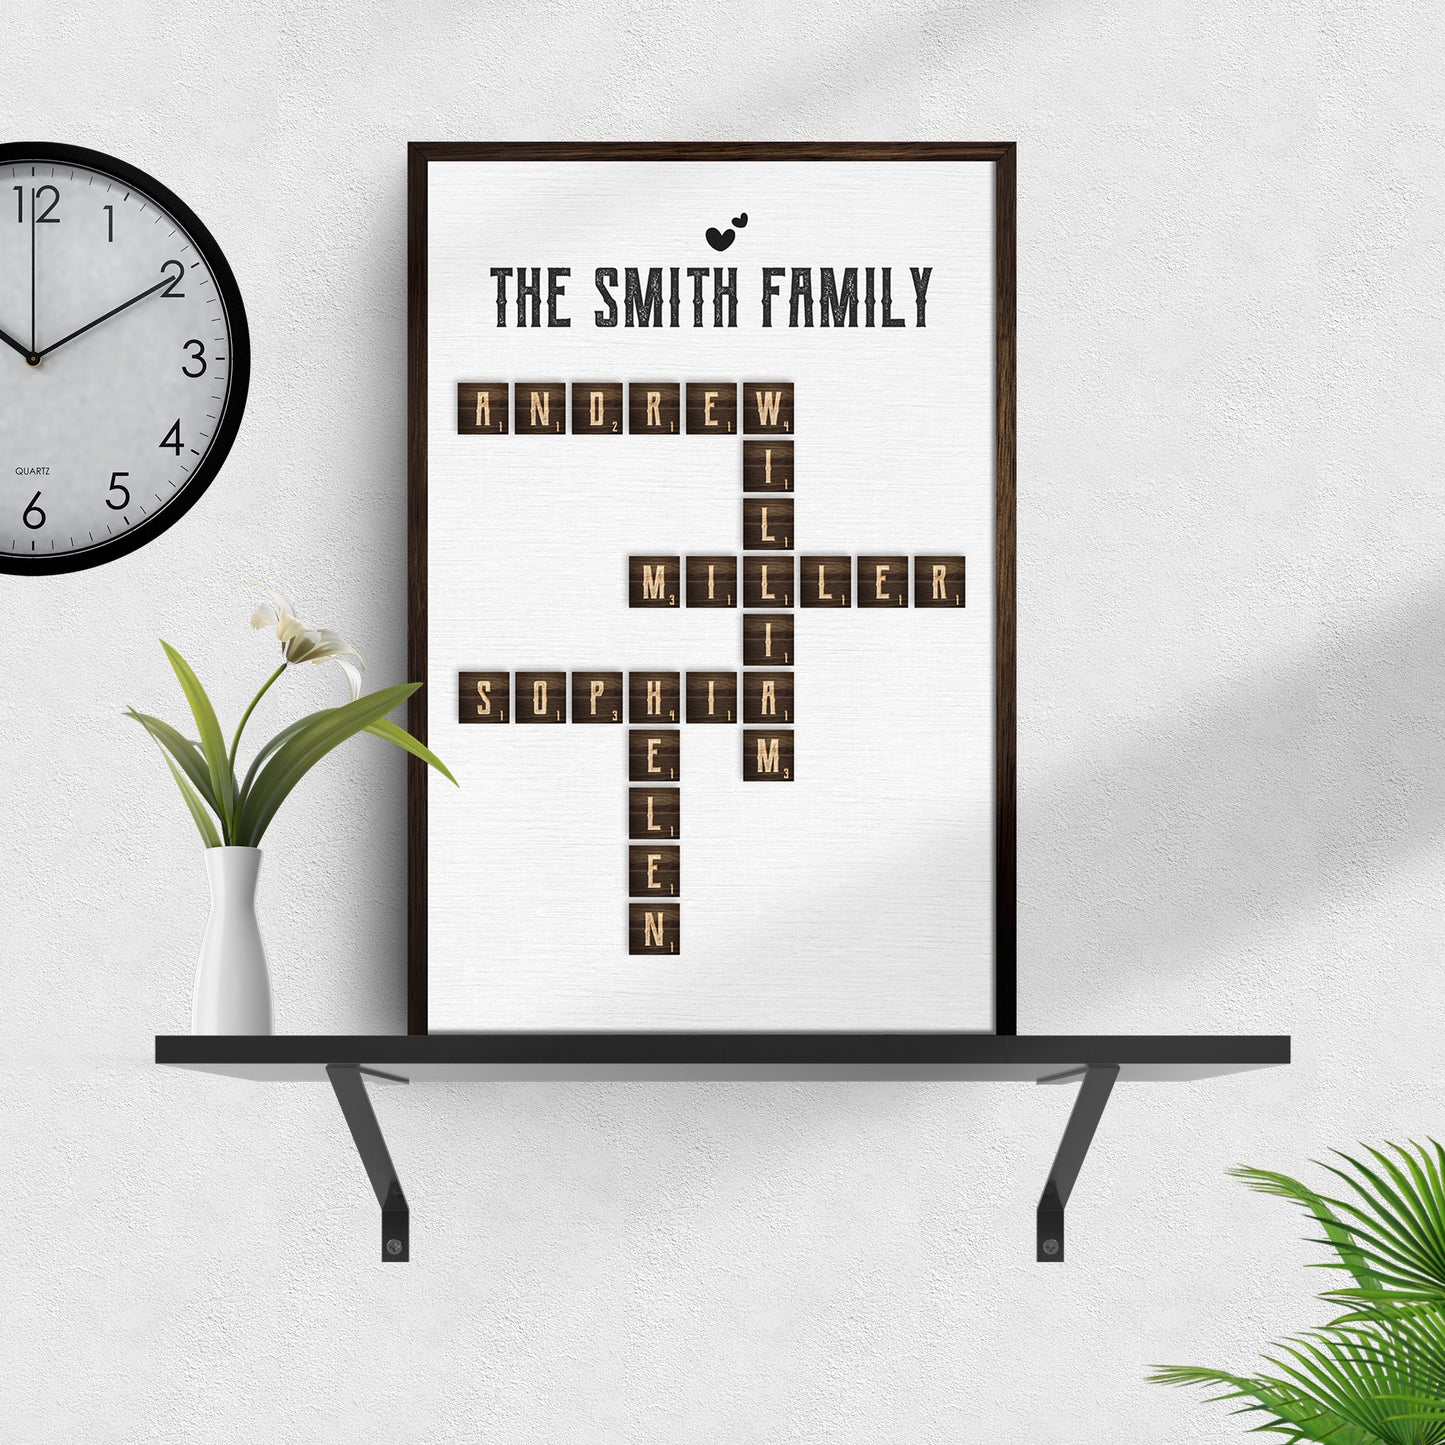 Scrabble Family Name Sign - Image by Tailored Canvases